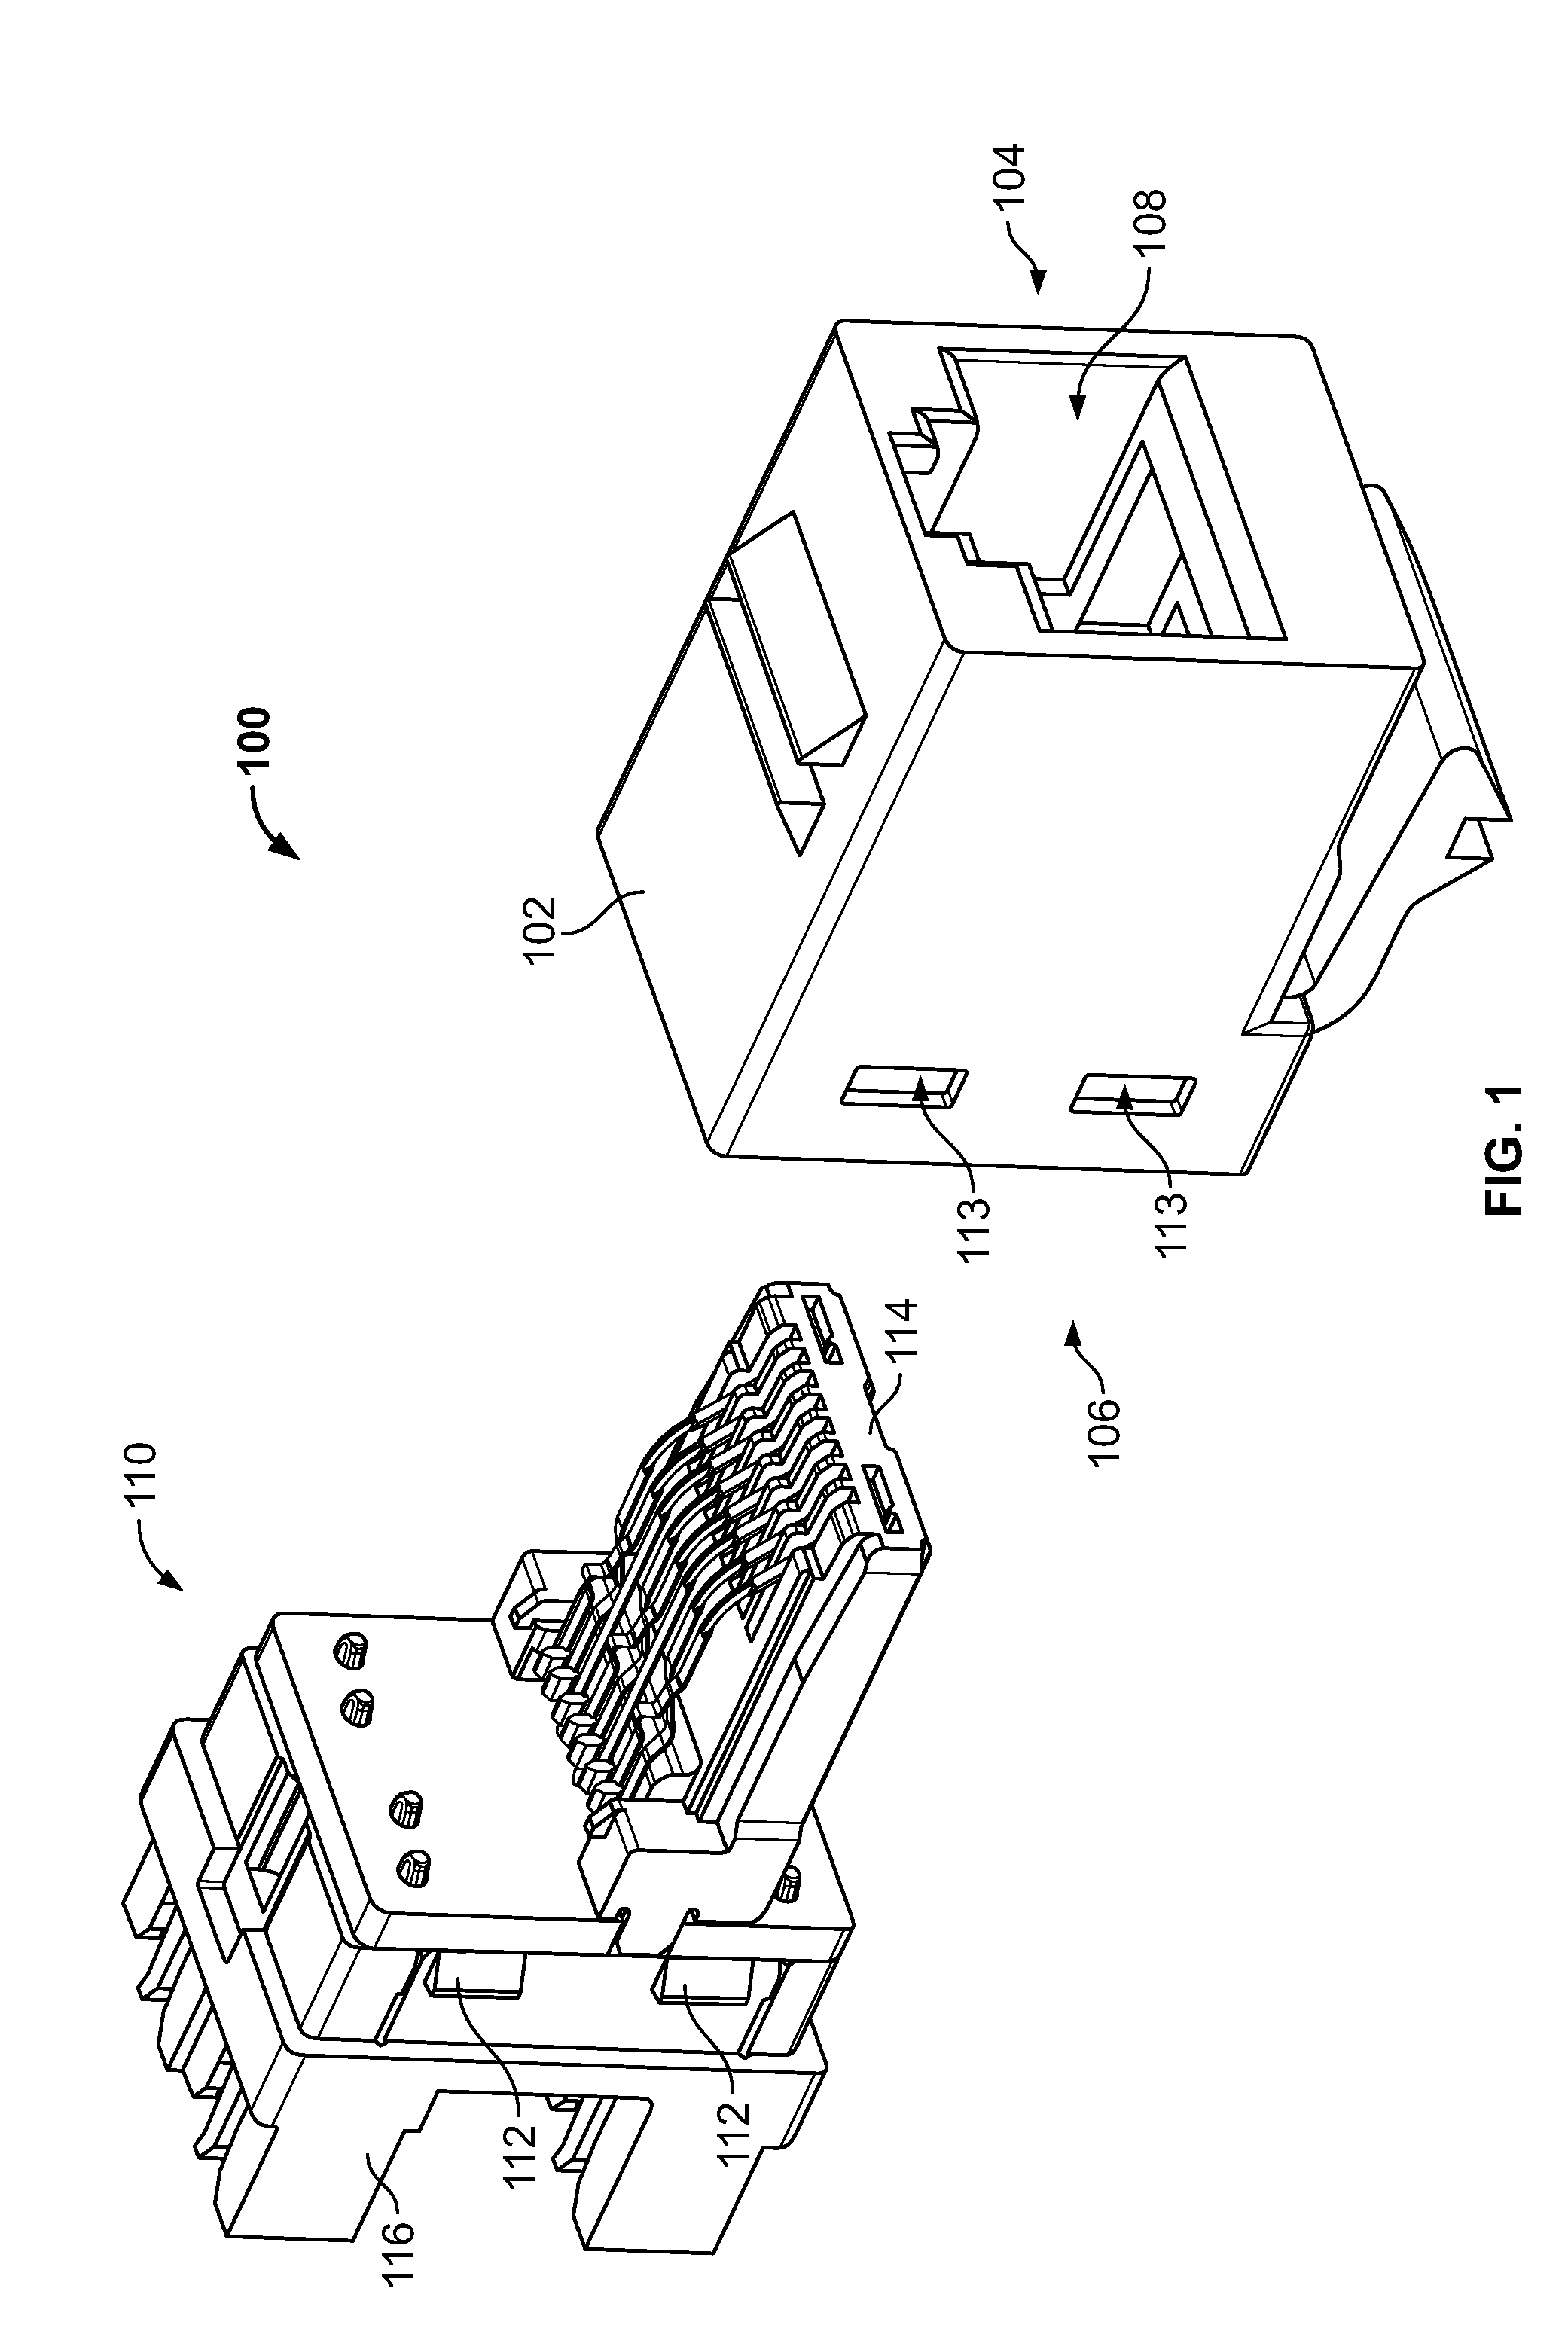 Electrical connectors and circuit boards having non-ohmic plates